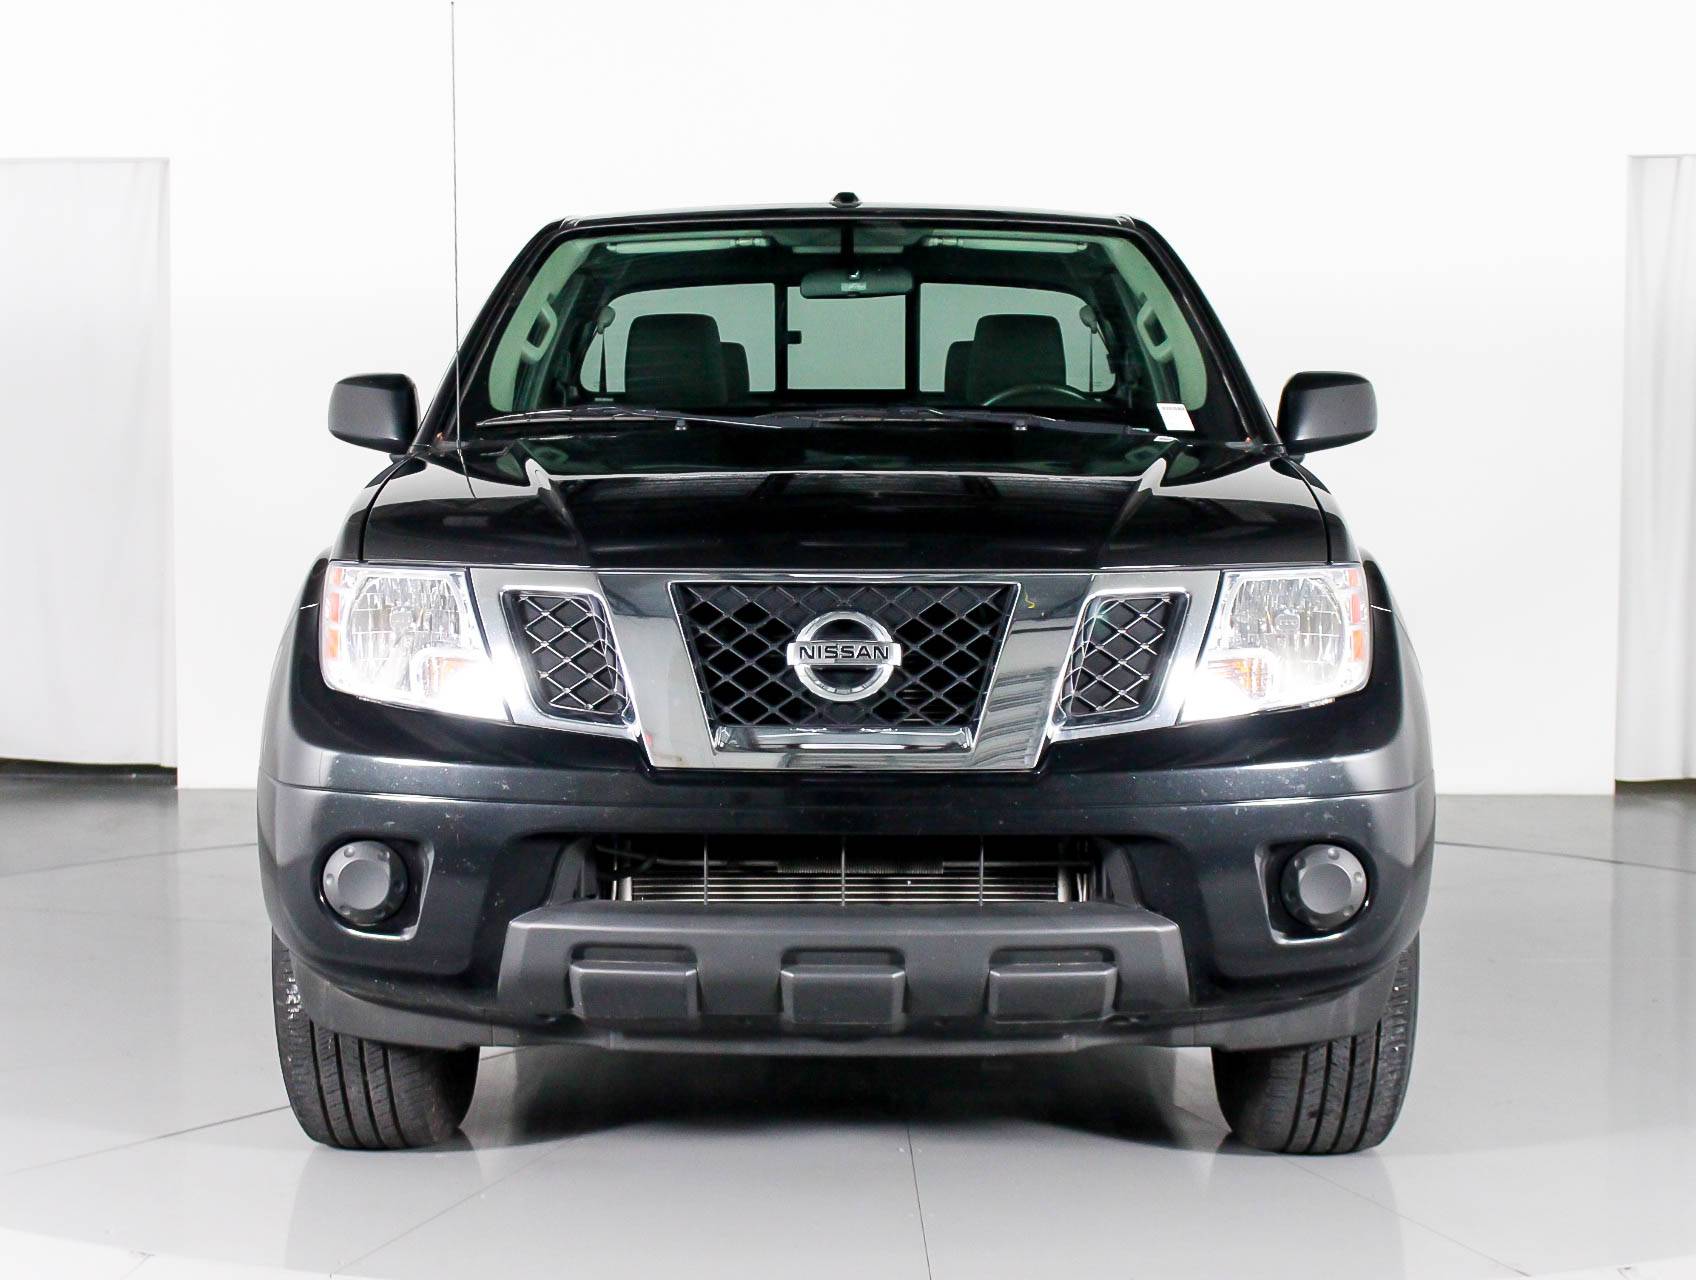 Florida Fine Cars - Used NISSAN FRONTIER 2017 MARGATE Sv King Cab